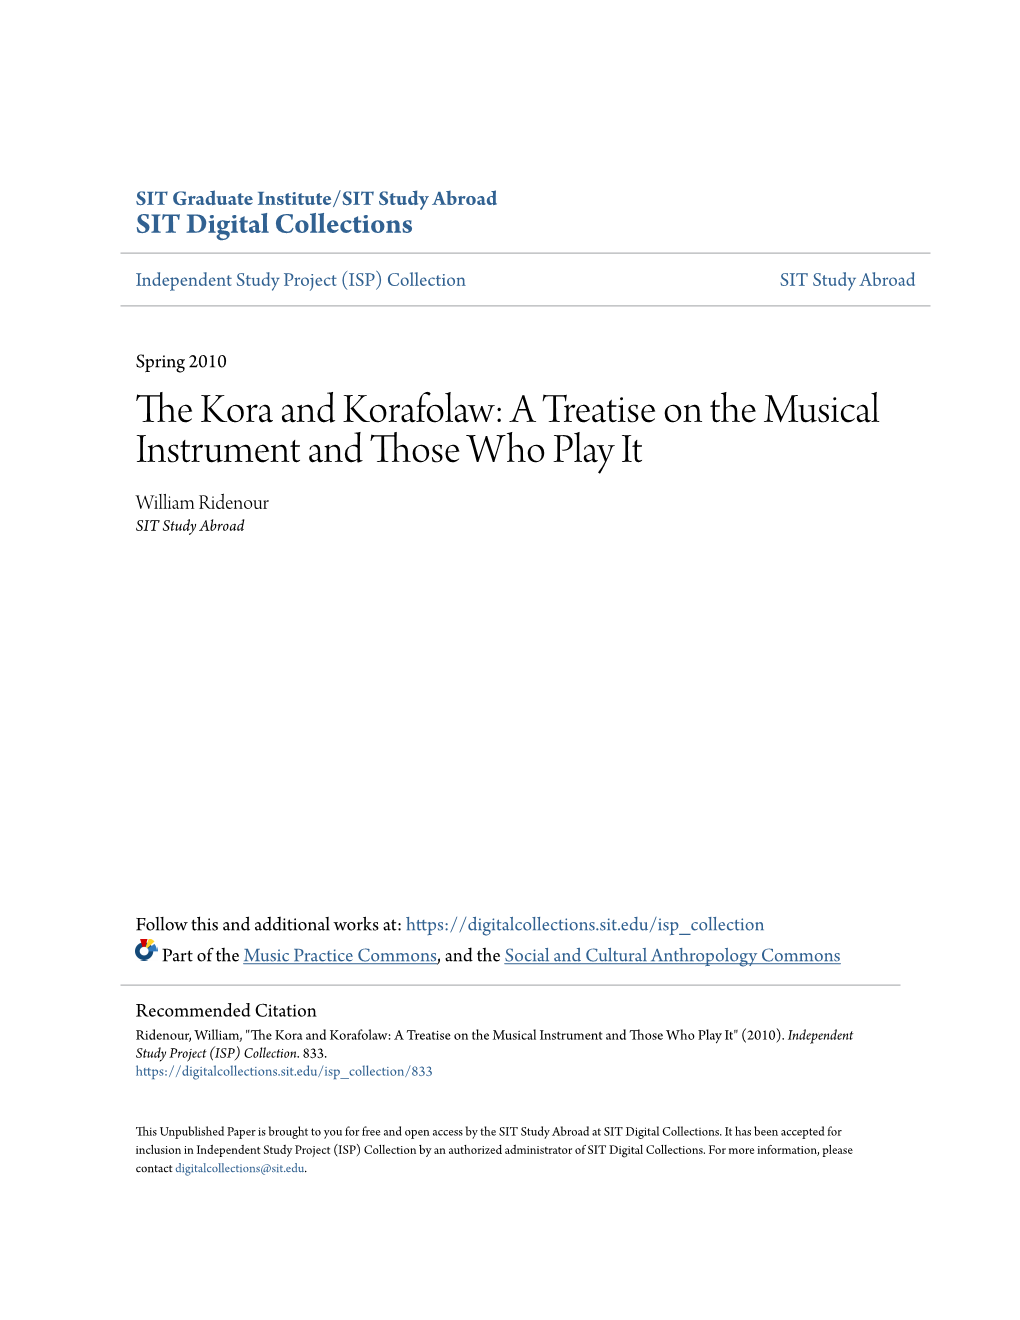 The Kora and Korafolaw: a Treatise on the Musical Instrument and Those Who Play It William Ridenour SIT Study Abroad